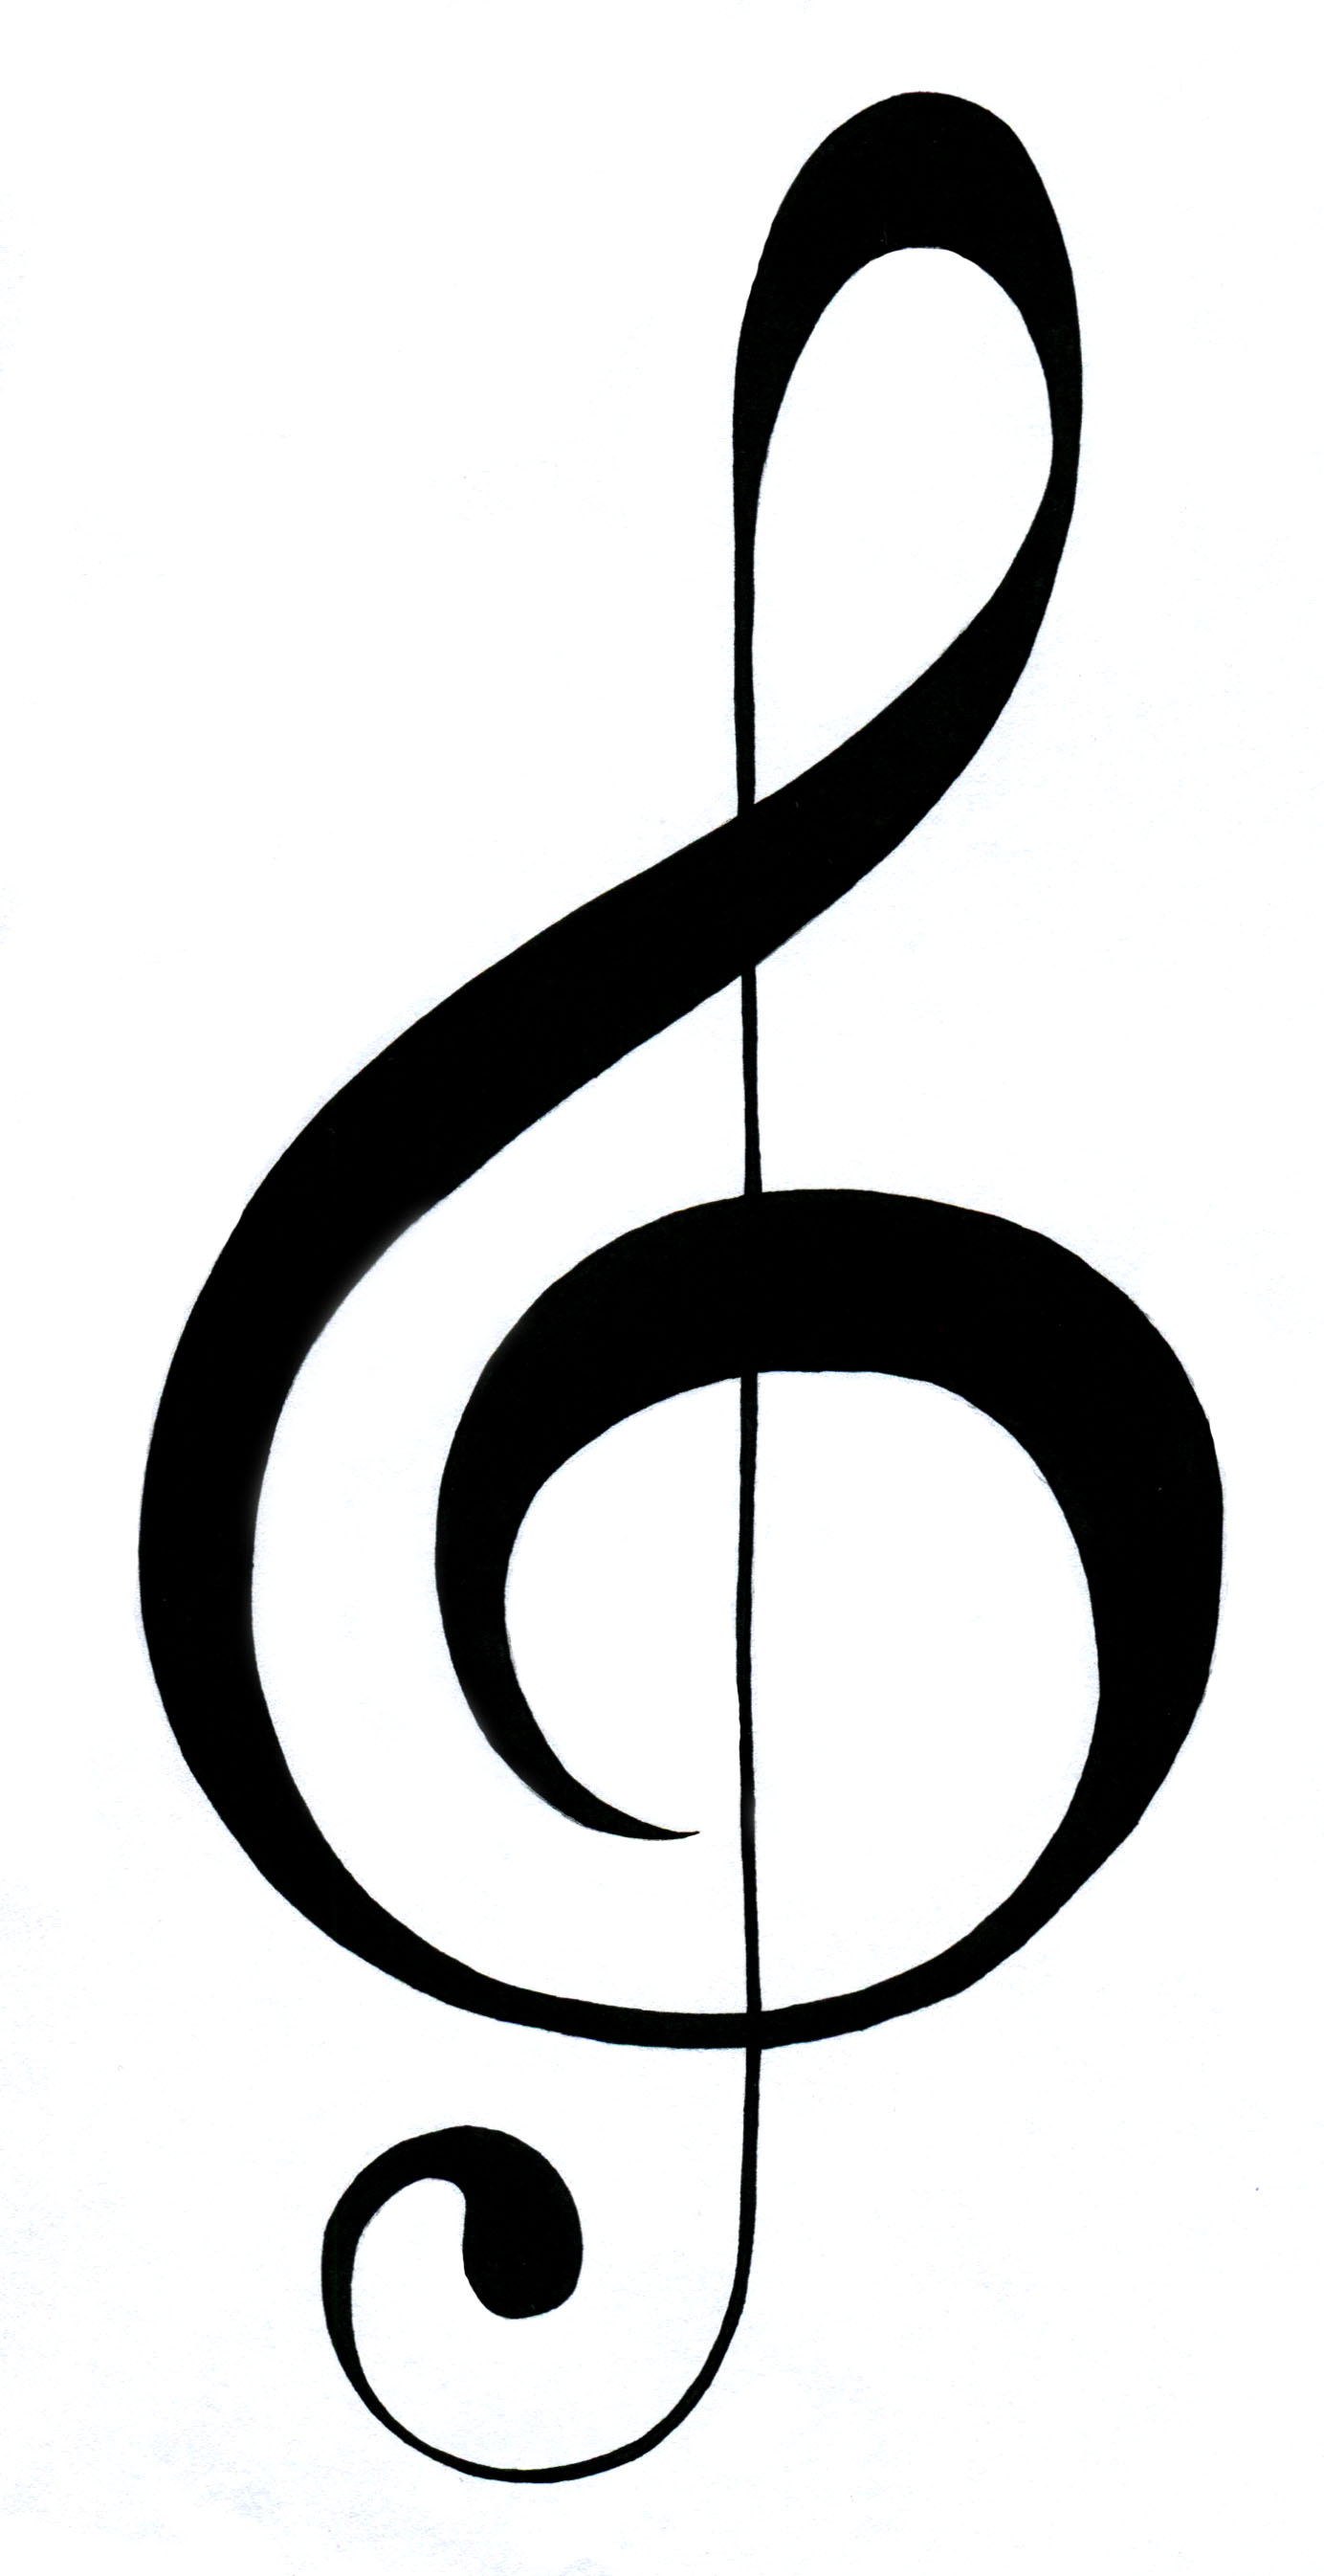 The Elegance Of Treble Clef Images Exploring The Use Of Musical